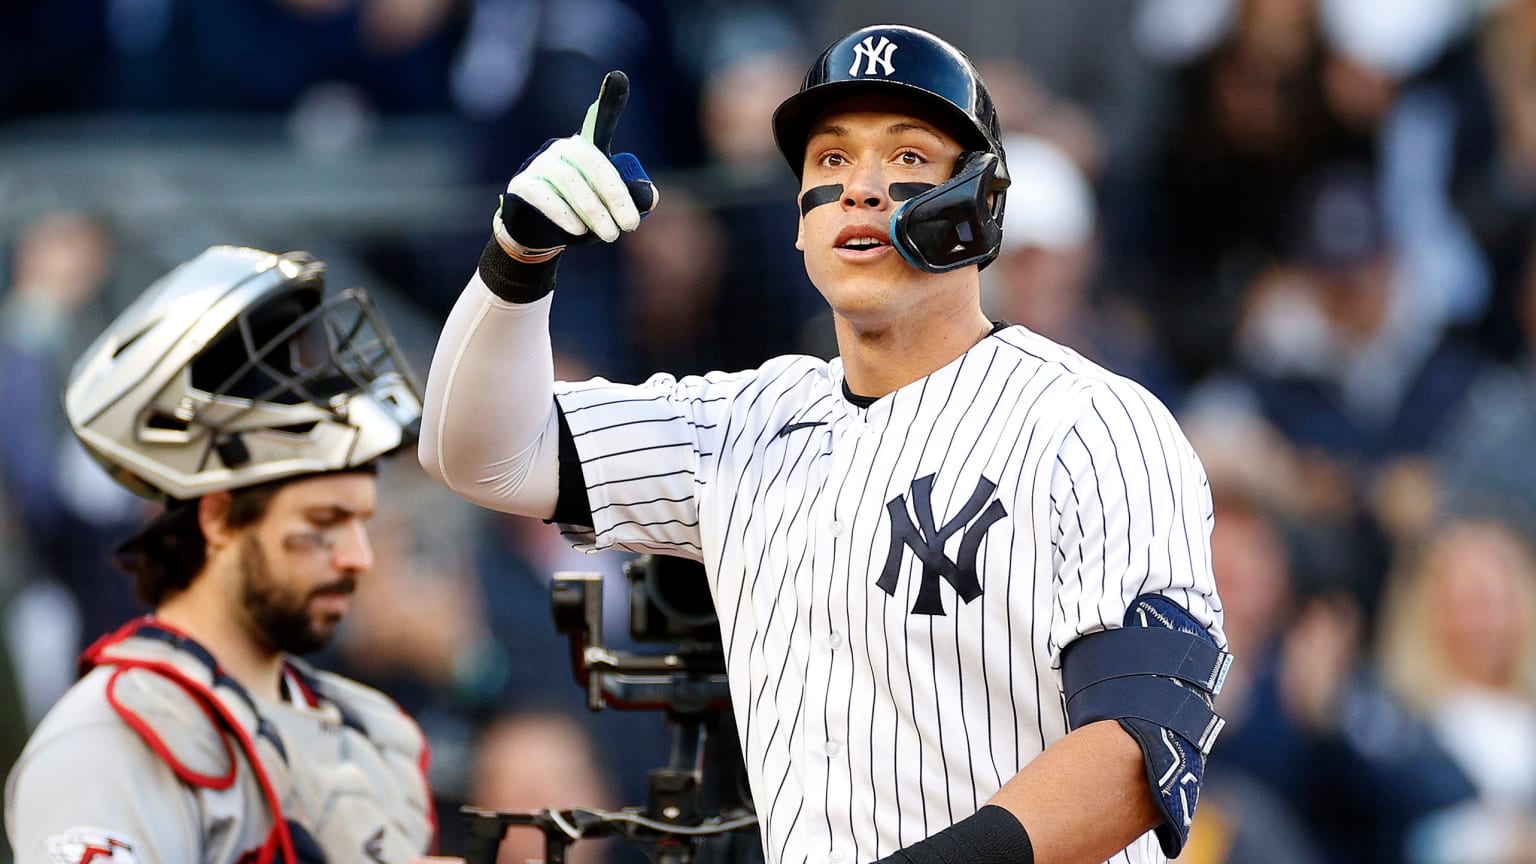 Aaron Judge points after scoring